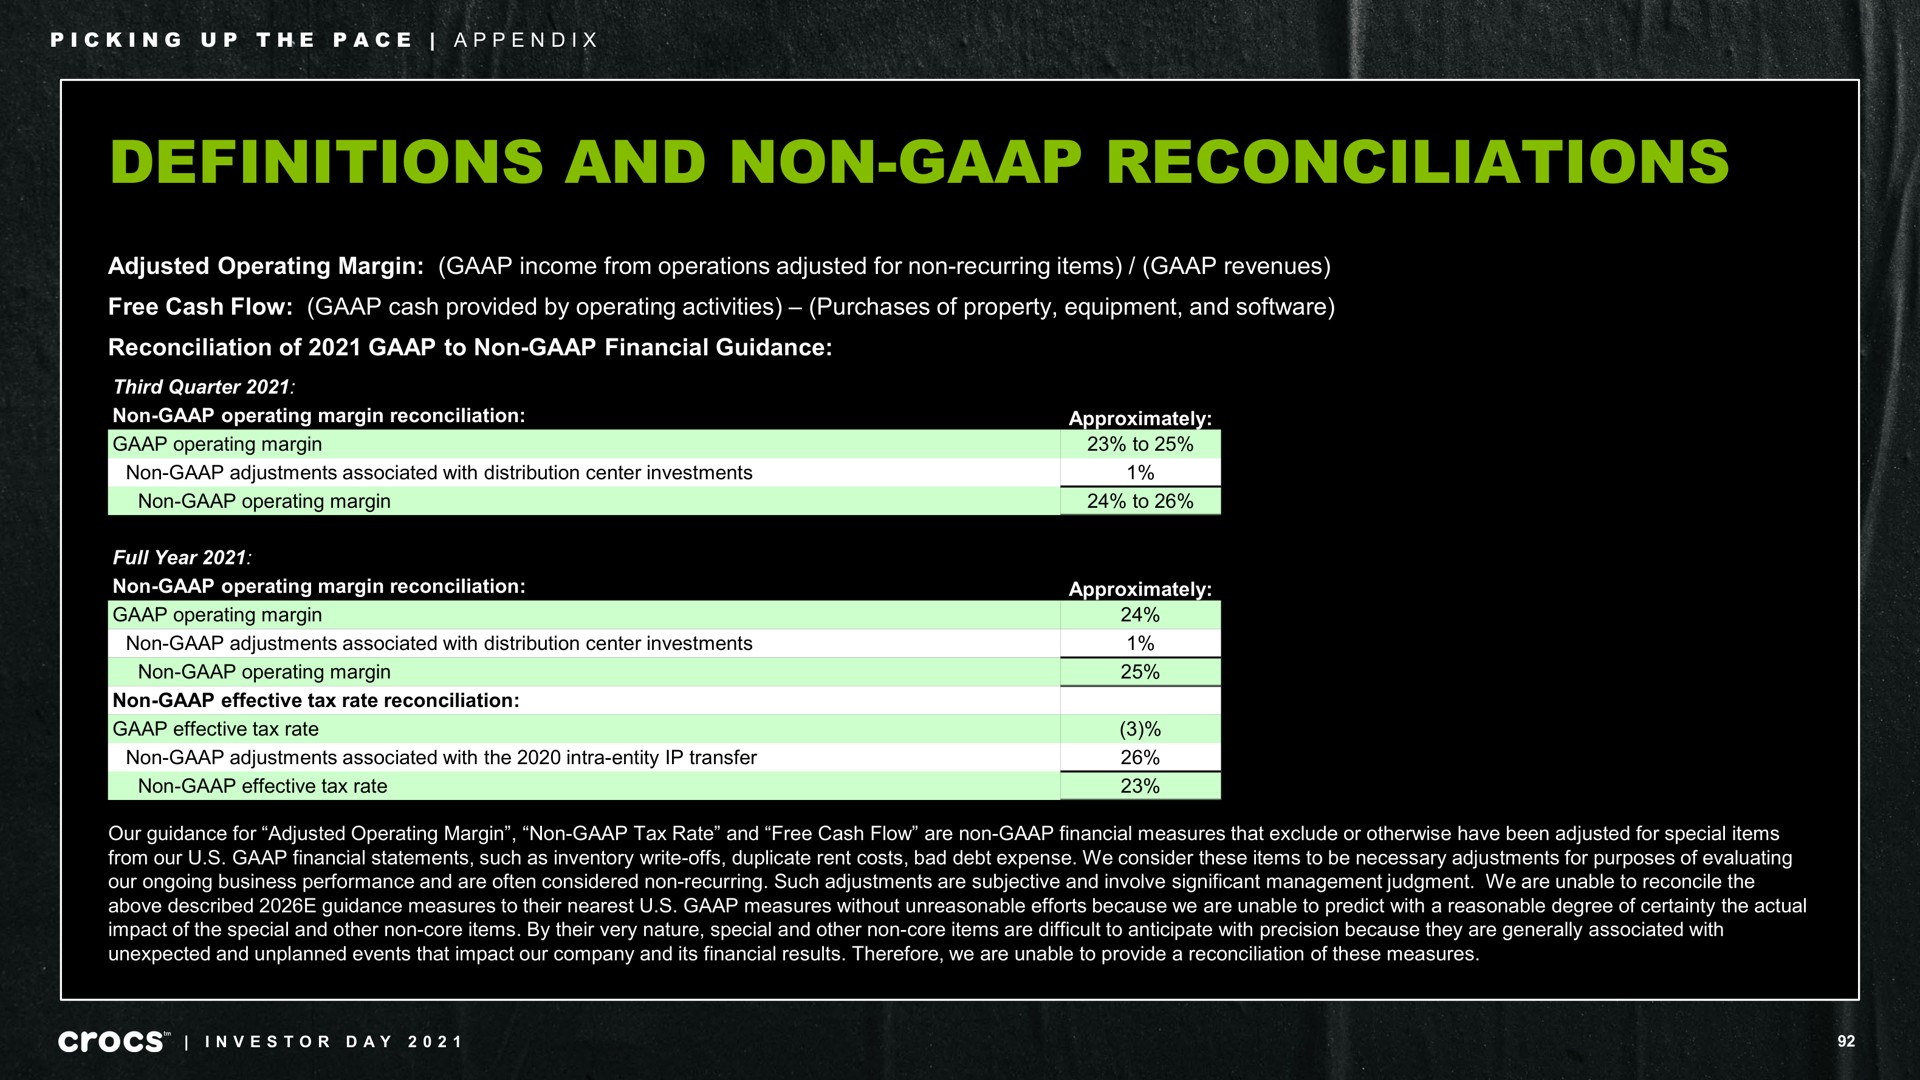 definitions and non reconciliations adjusted operating margin income from operations adjusted for non recurring items revenues free cash flow cash provided by operating activities purchases of property equipment and reconciliation of to non financial guidance picking up the pace appendix investor day | Crocs